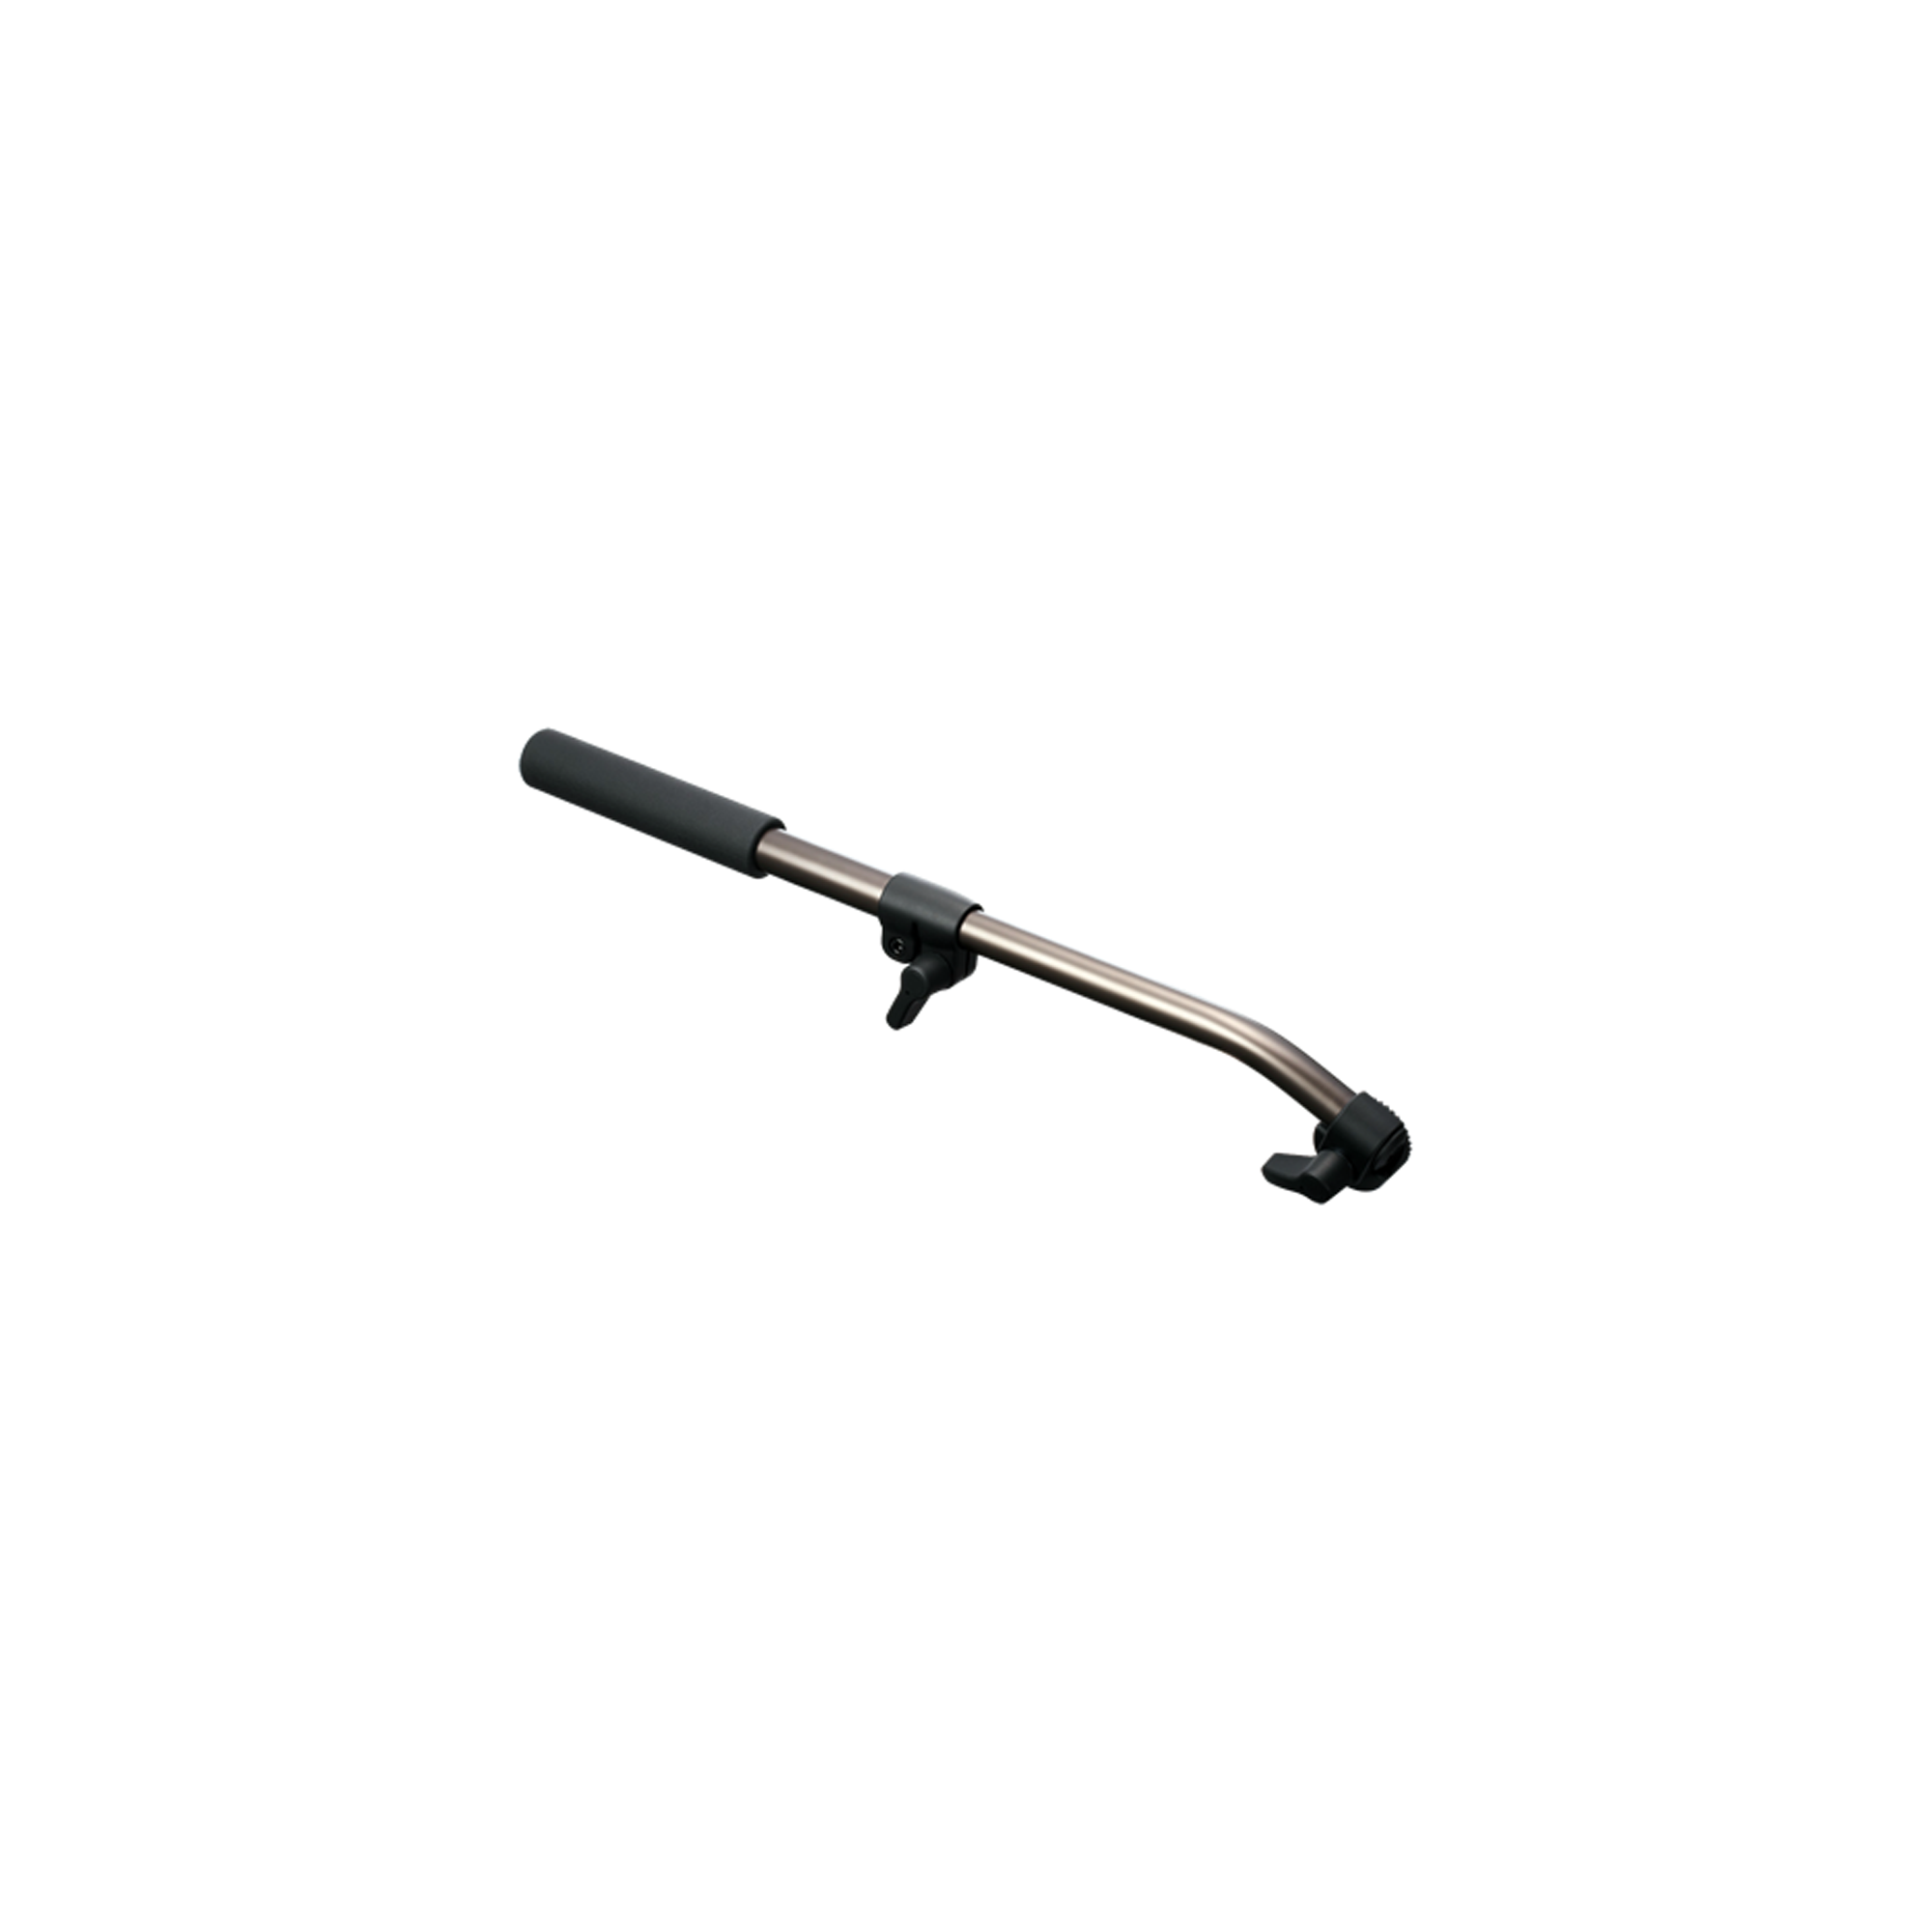 Libec Extendable pan handle for LX10 Head, RHP75 and RHP85 for Left Hand